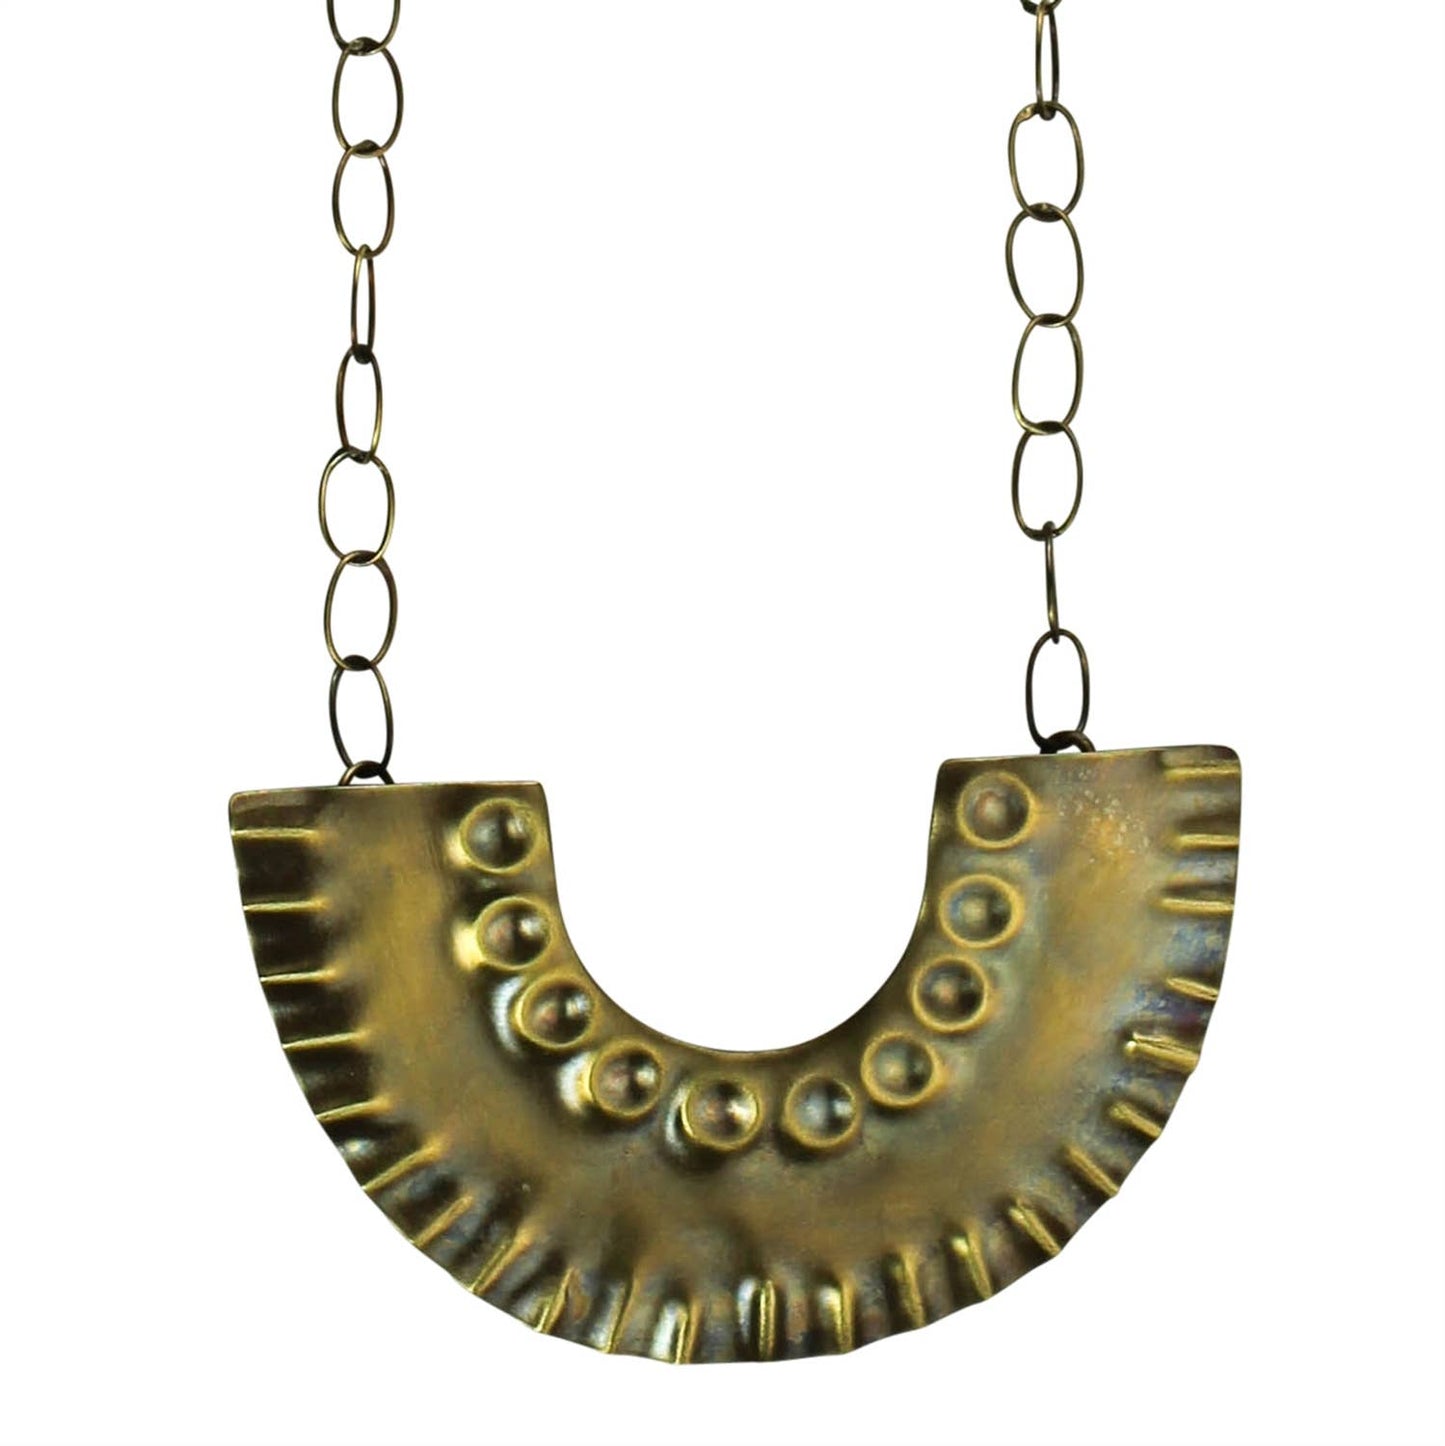 Pictured against a white background is a brass chained necklace that features a crescent "u" shaped pendant that features circles and lines on it.